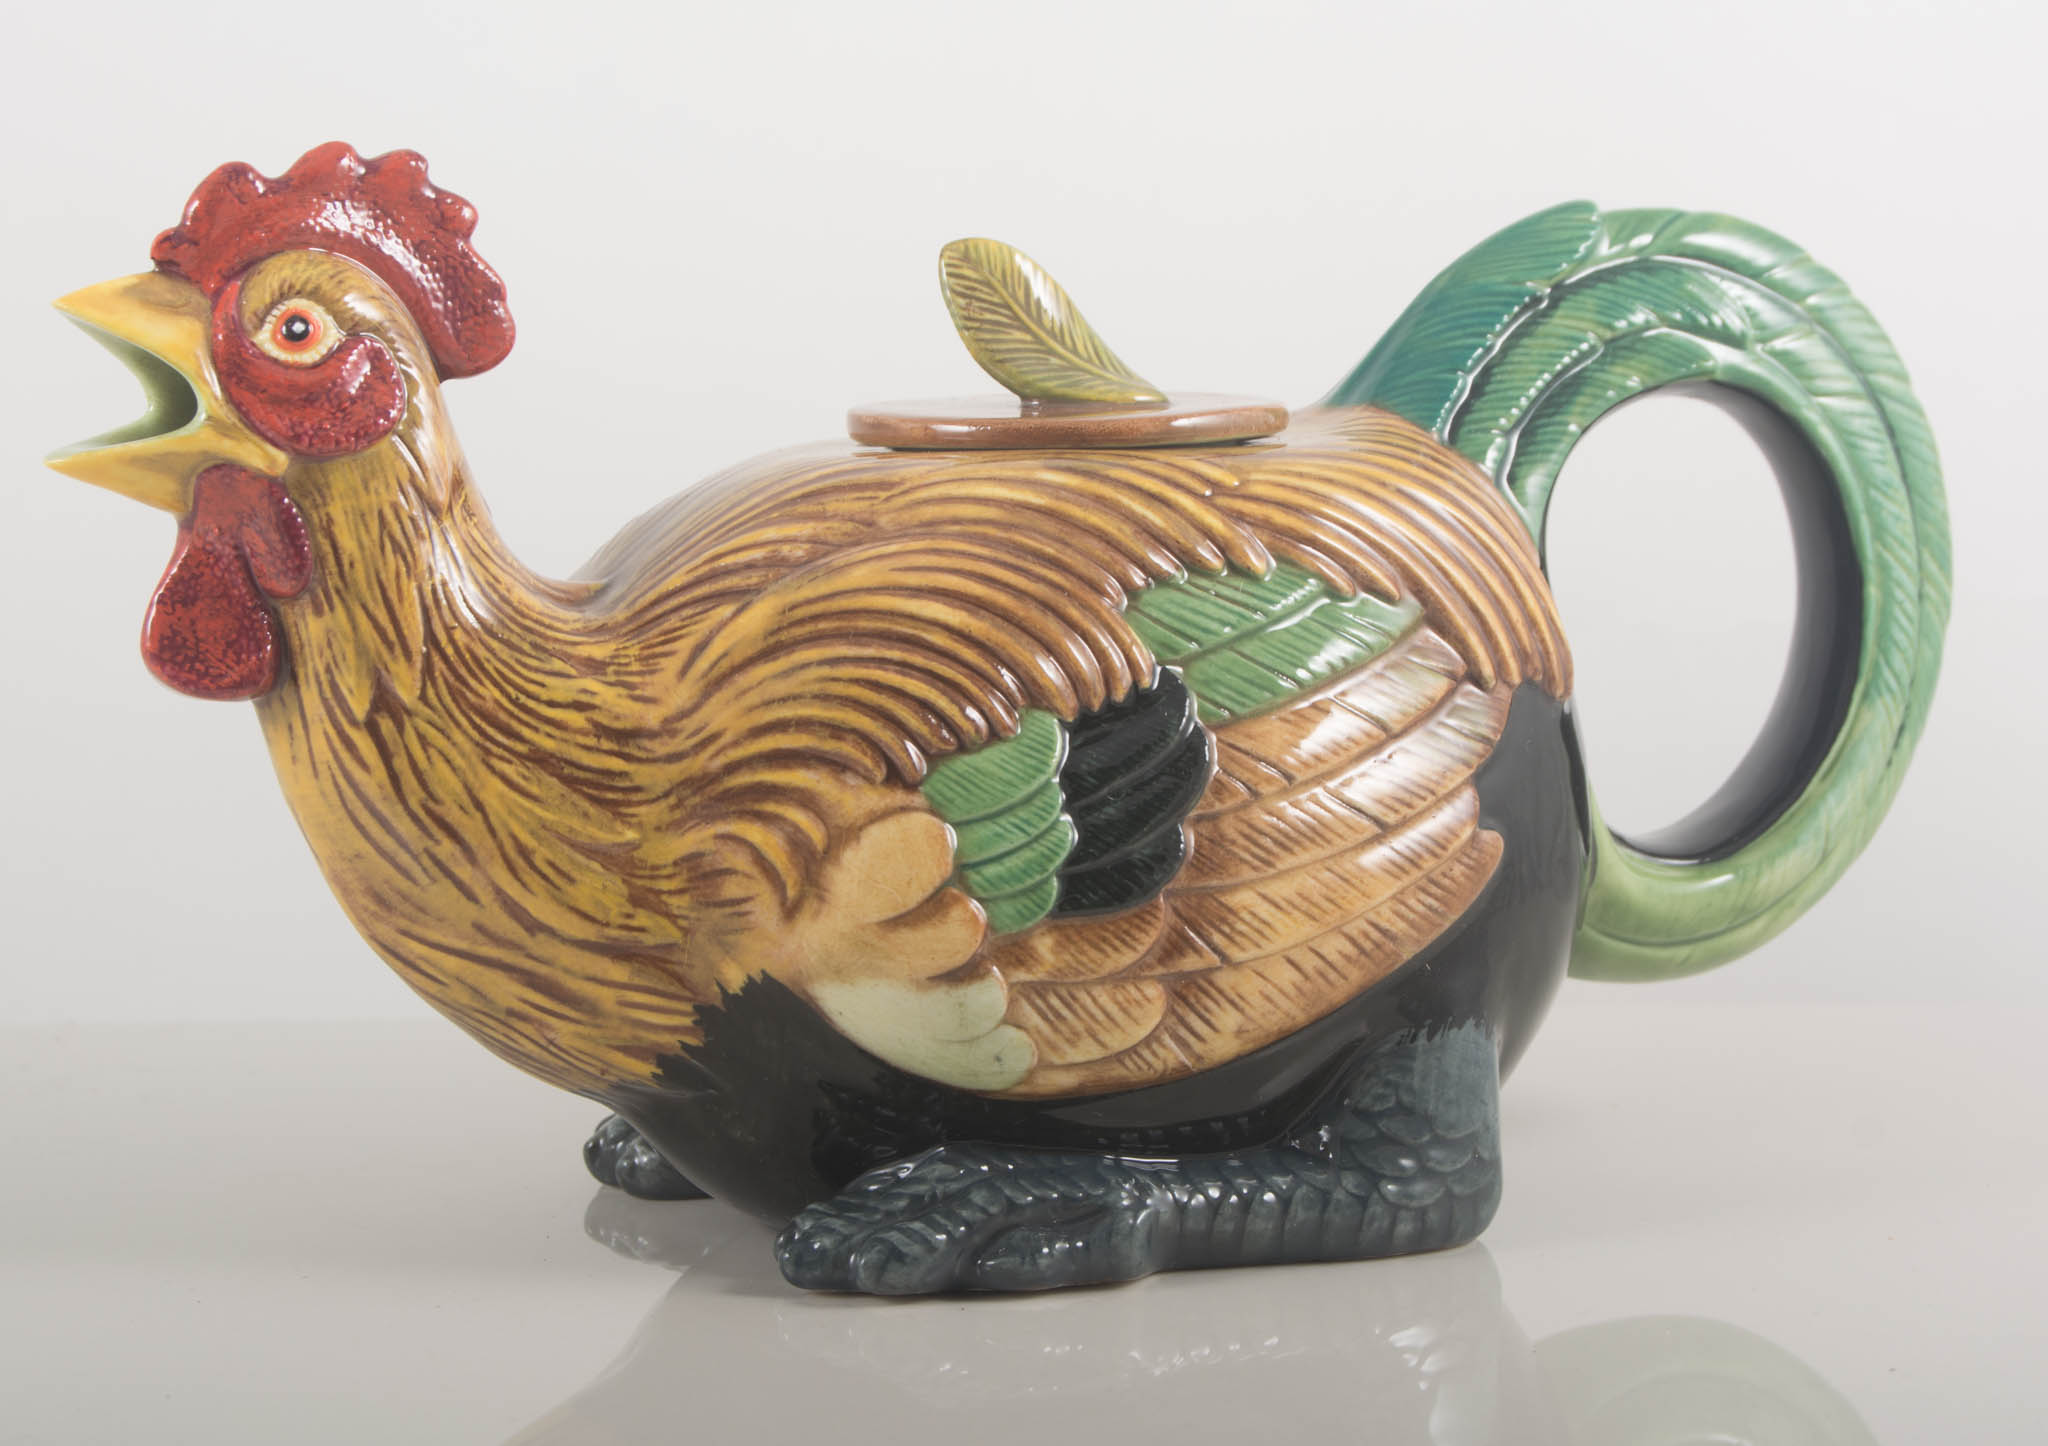 Minton Archive Collection Cockerel teapot, Limited Edition No.160/2500, with certificate, boxed.